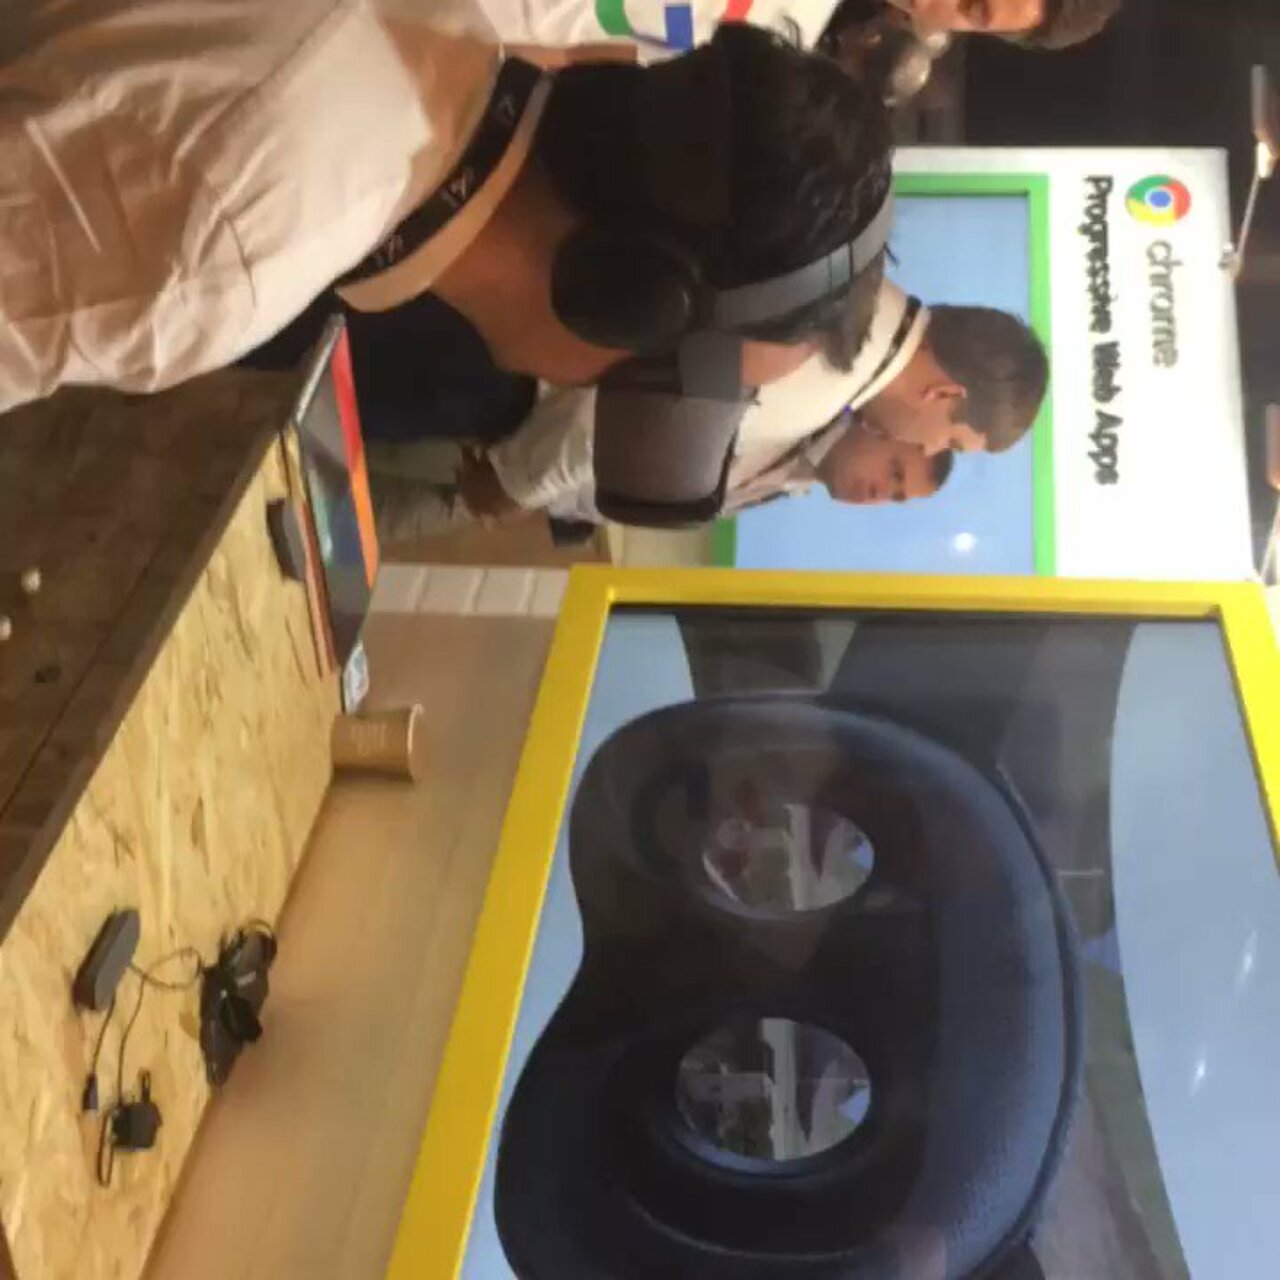 3rd day at #IBC2017 @Google take on VR with YI HALO - 360 camera - VR on a truly next level https://t.co/EIuMjdsXAS